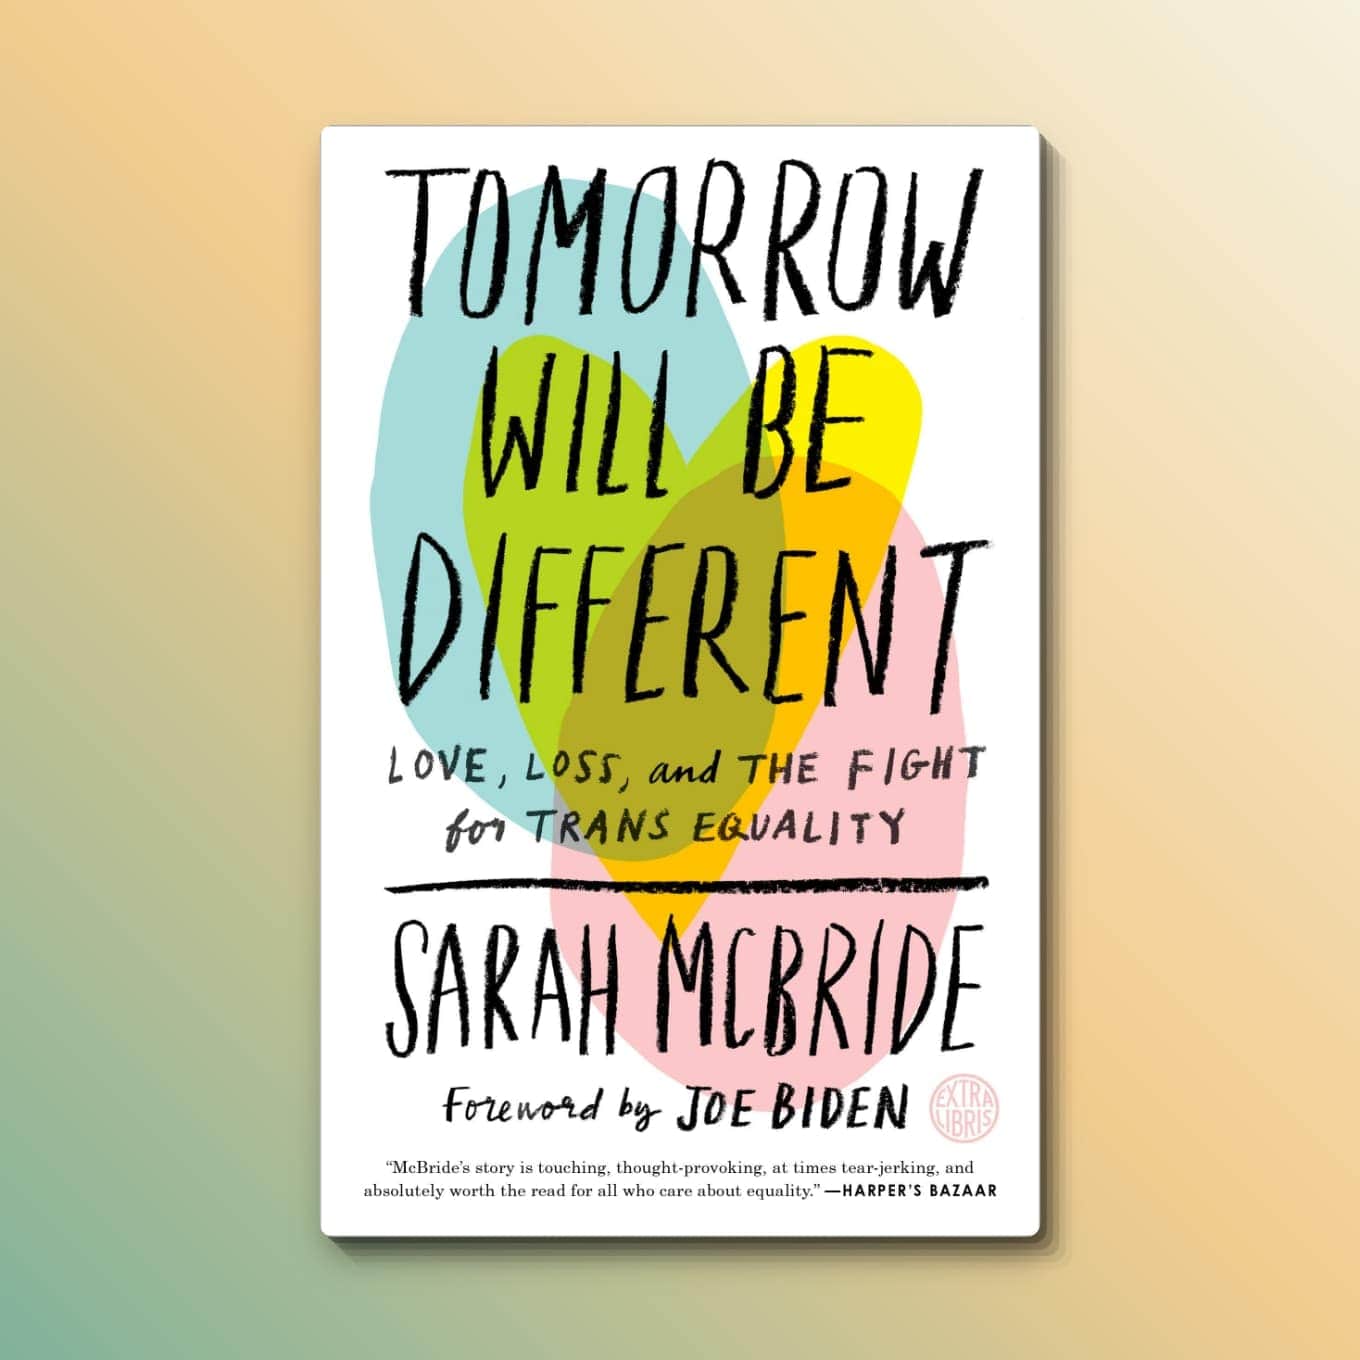 “Tomorrow Will Be Different: Love, Loss, and the Fight for Trans Equality” by Sarah McBride, Foreword by Joe Biden